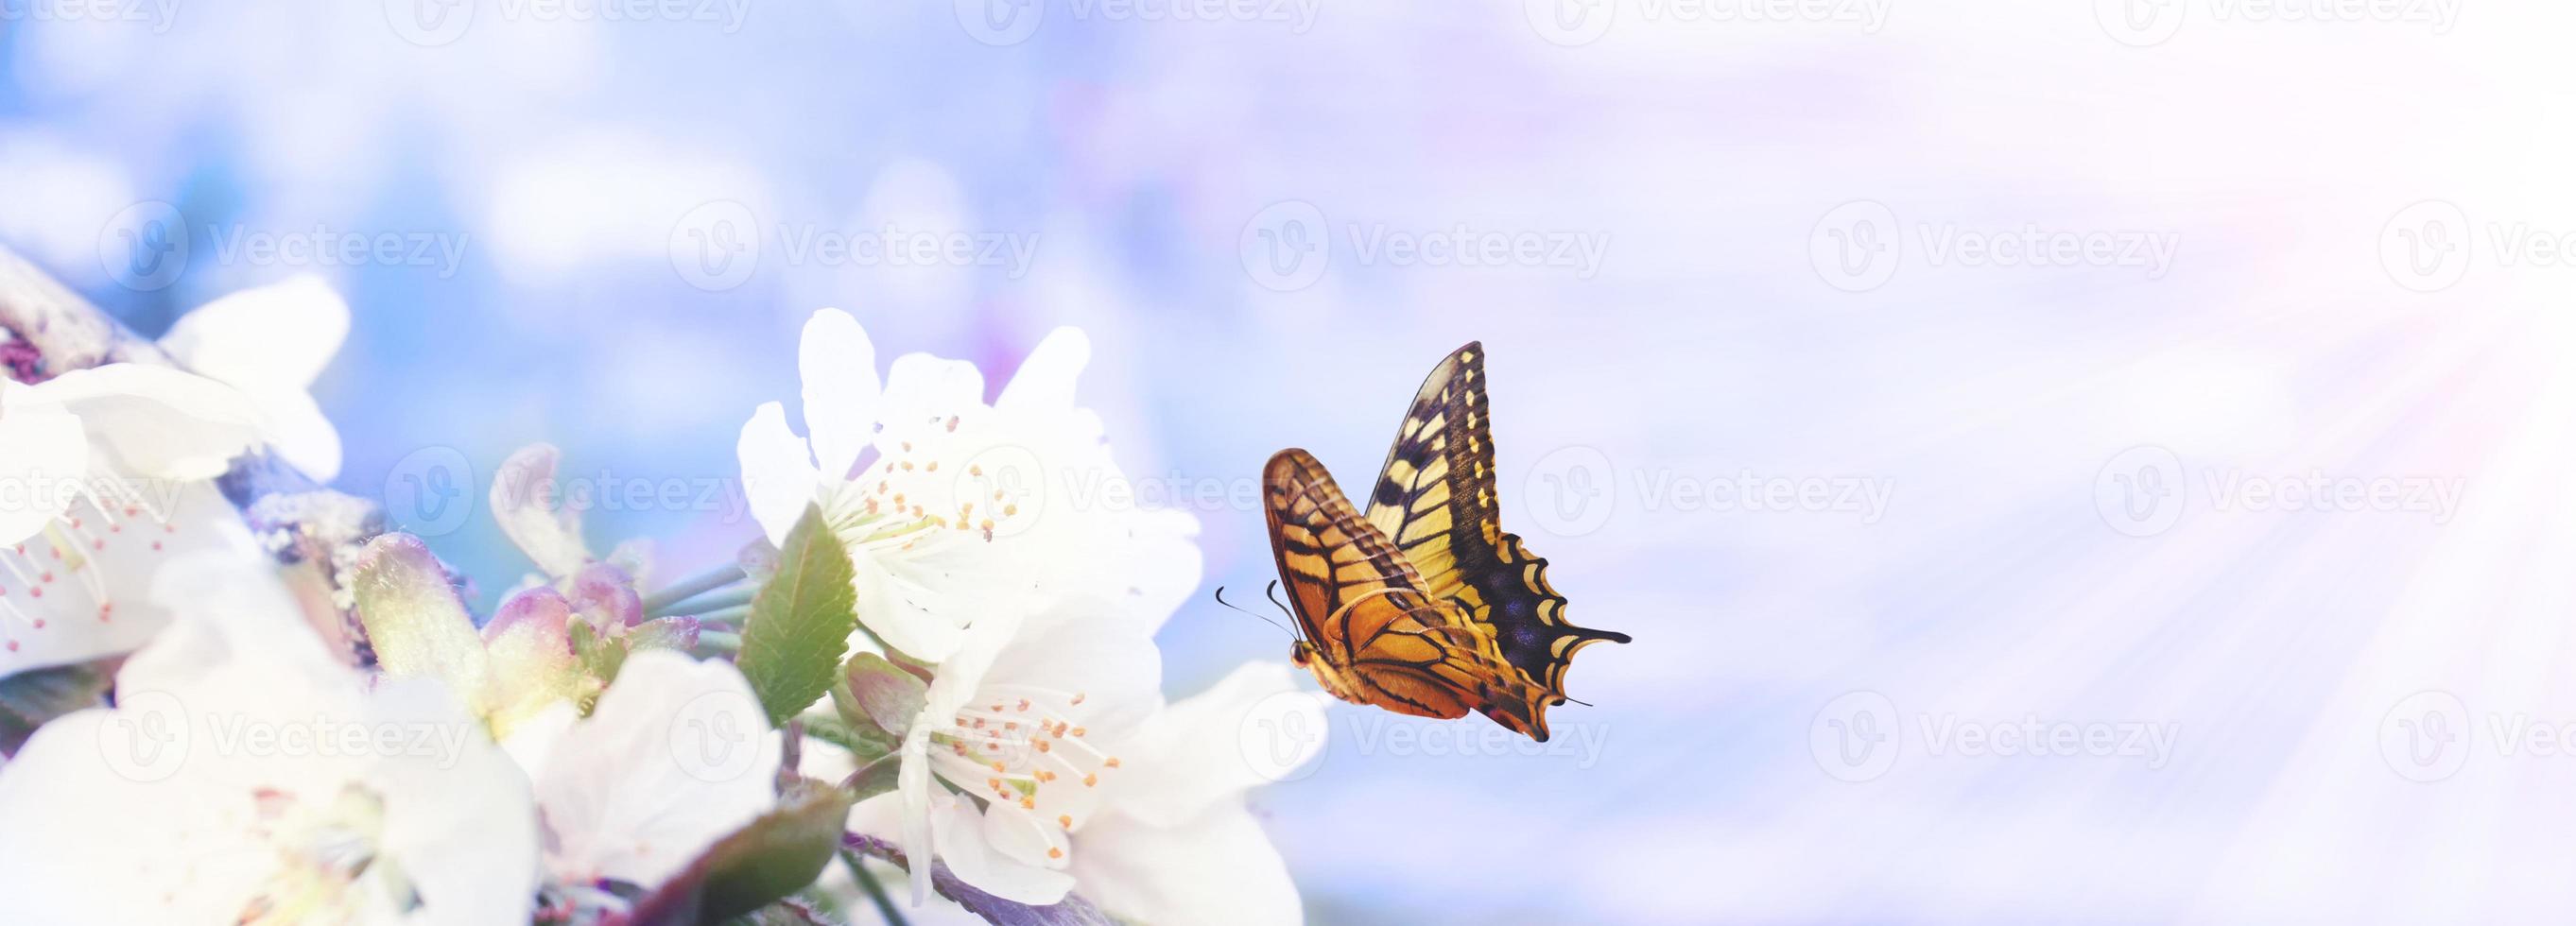 Butterfly and a beautiful nature view of spring flowering trees on blurred background. photo